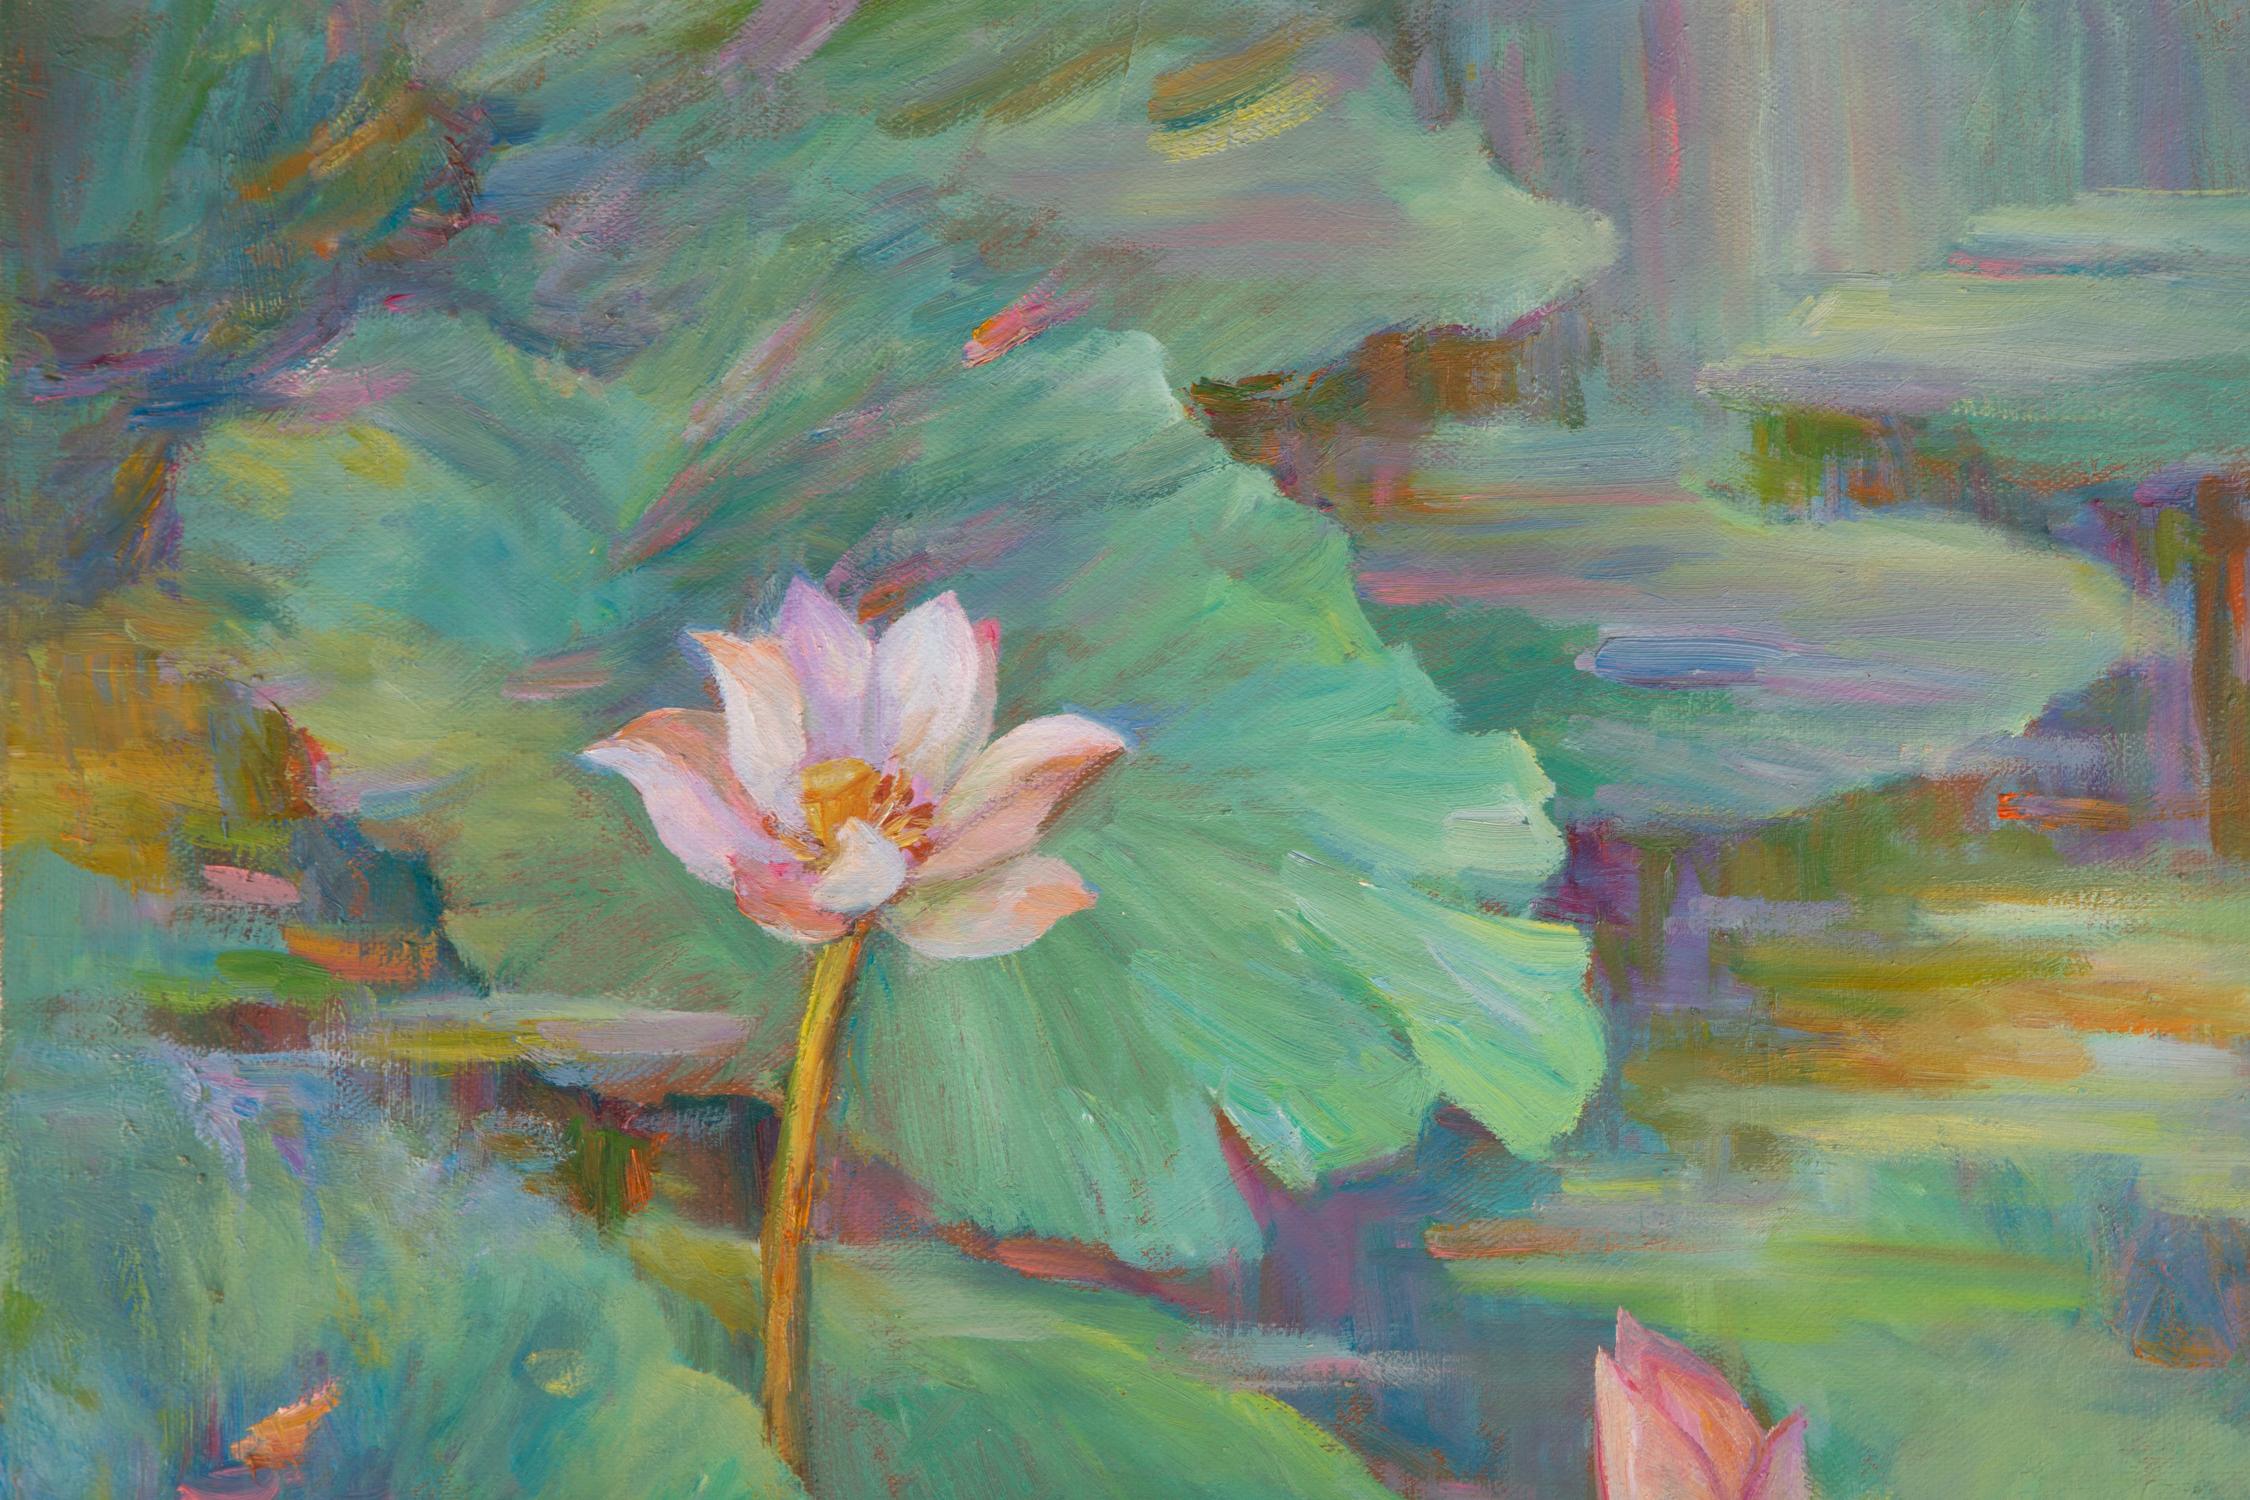 Title: Lost Beauty - Lotus
 Medium: Oil on canvas
 Size: 23.75 x 19.5 inches
 Frame: Framing options available!
 Condition: The painting appears to be in excellent condition.
 Note: This painting is unstretched
 Year: N/A
 Artist: ZhiQin Yu
